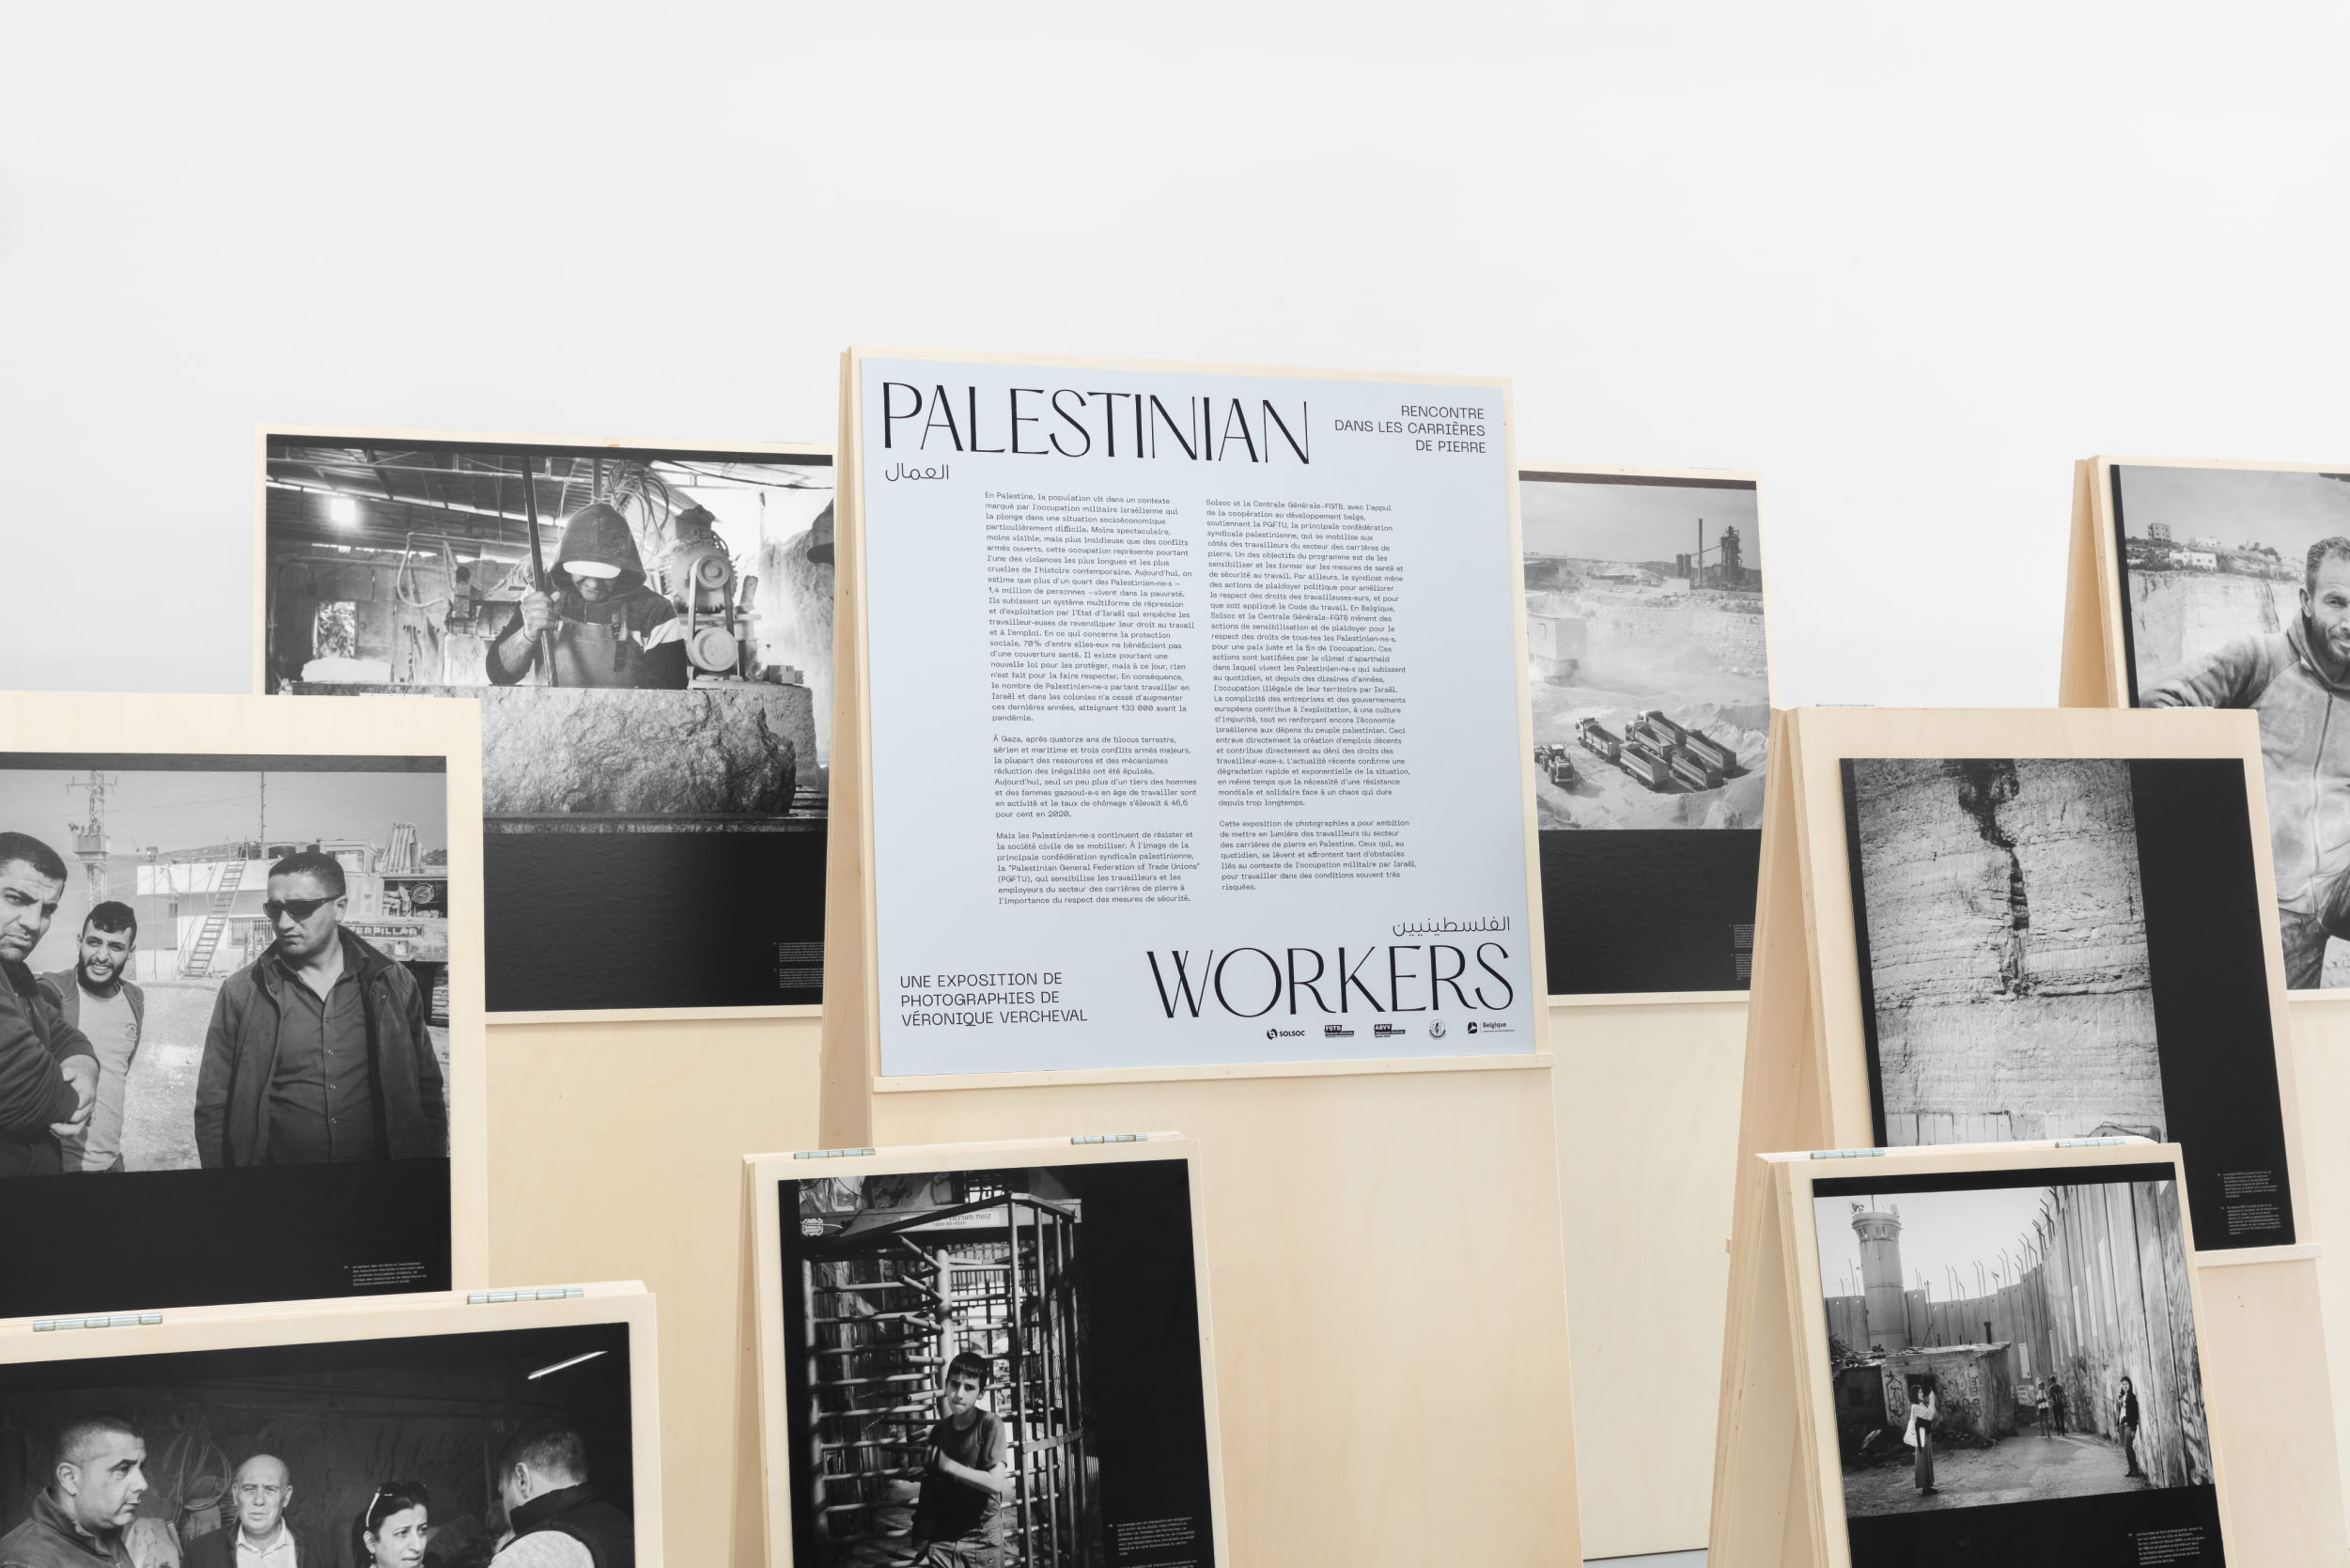 Case: Palestinian Workers